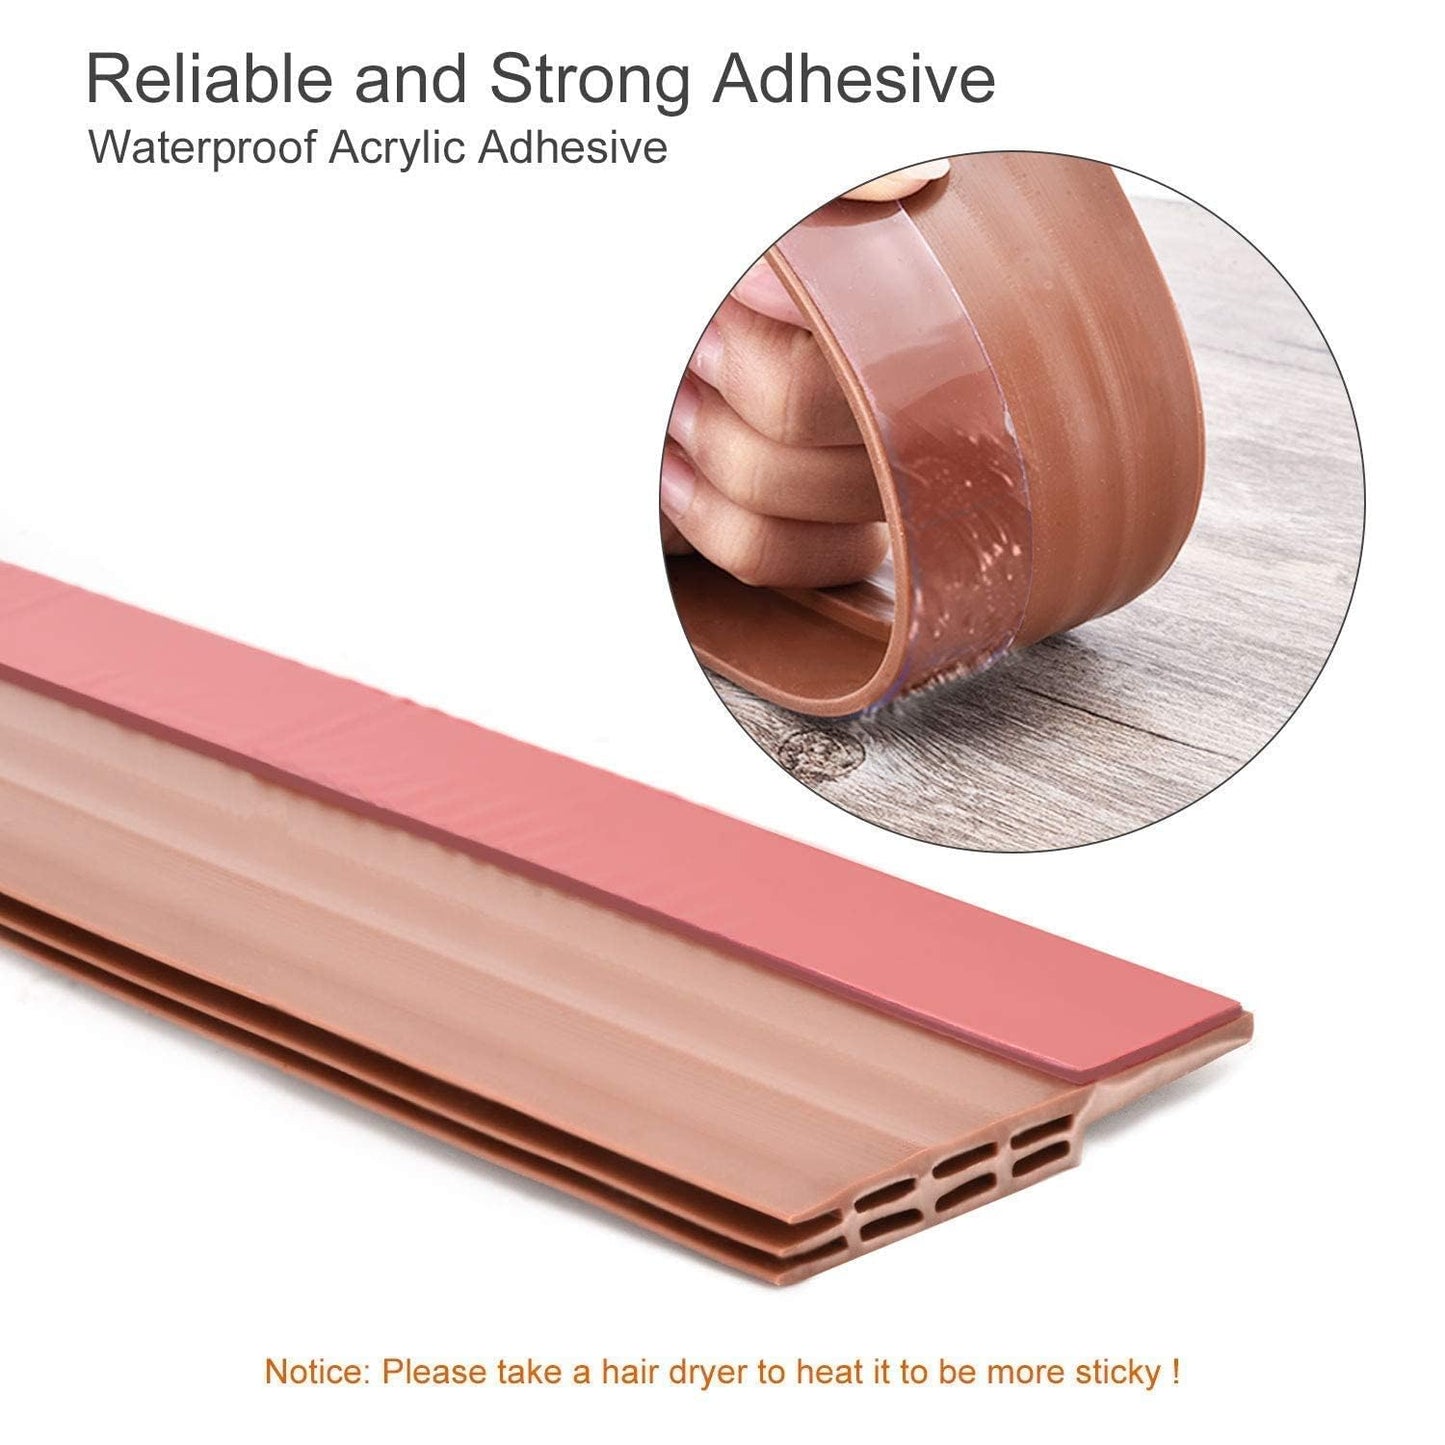 Energy Saver Door Draught Stopper Strong Adhesive Door Weather Stripping Door Under Seal Soundproof and Noise Stopper, 5.1cm W x 100cm L (Brown)